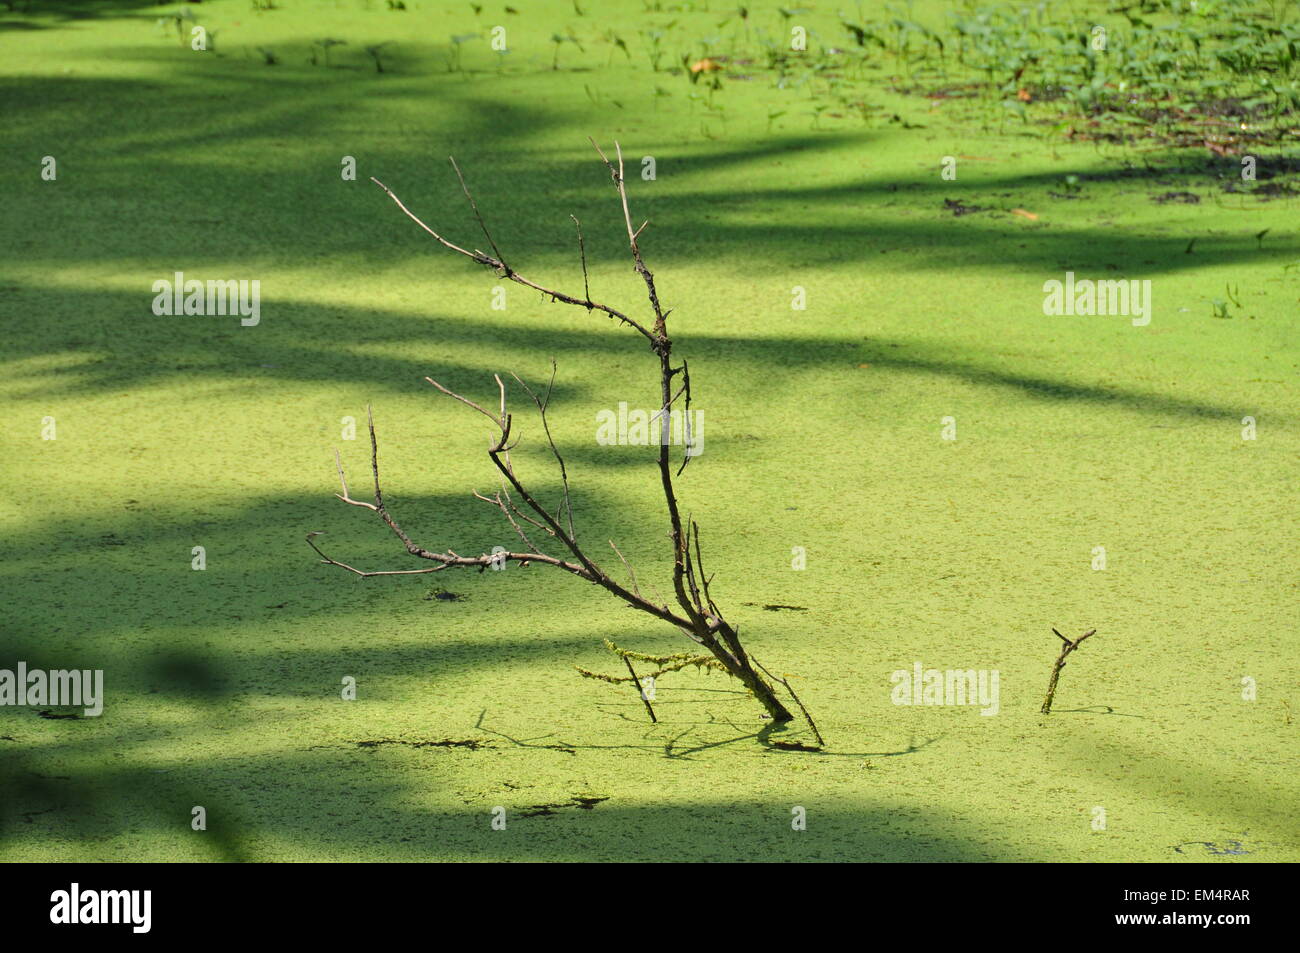 A tree branch immersed in green water pond. Stock Photo